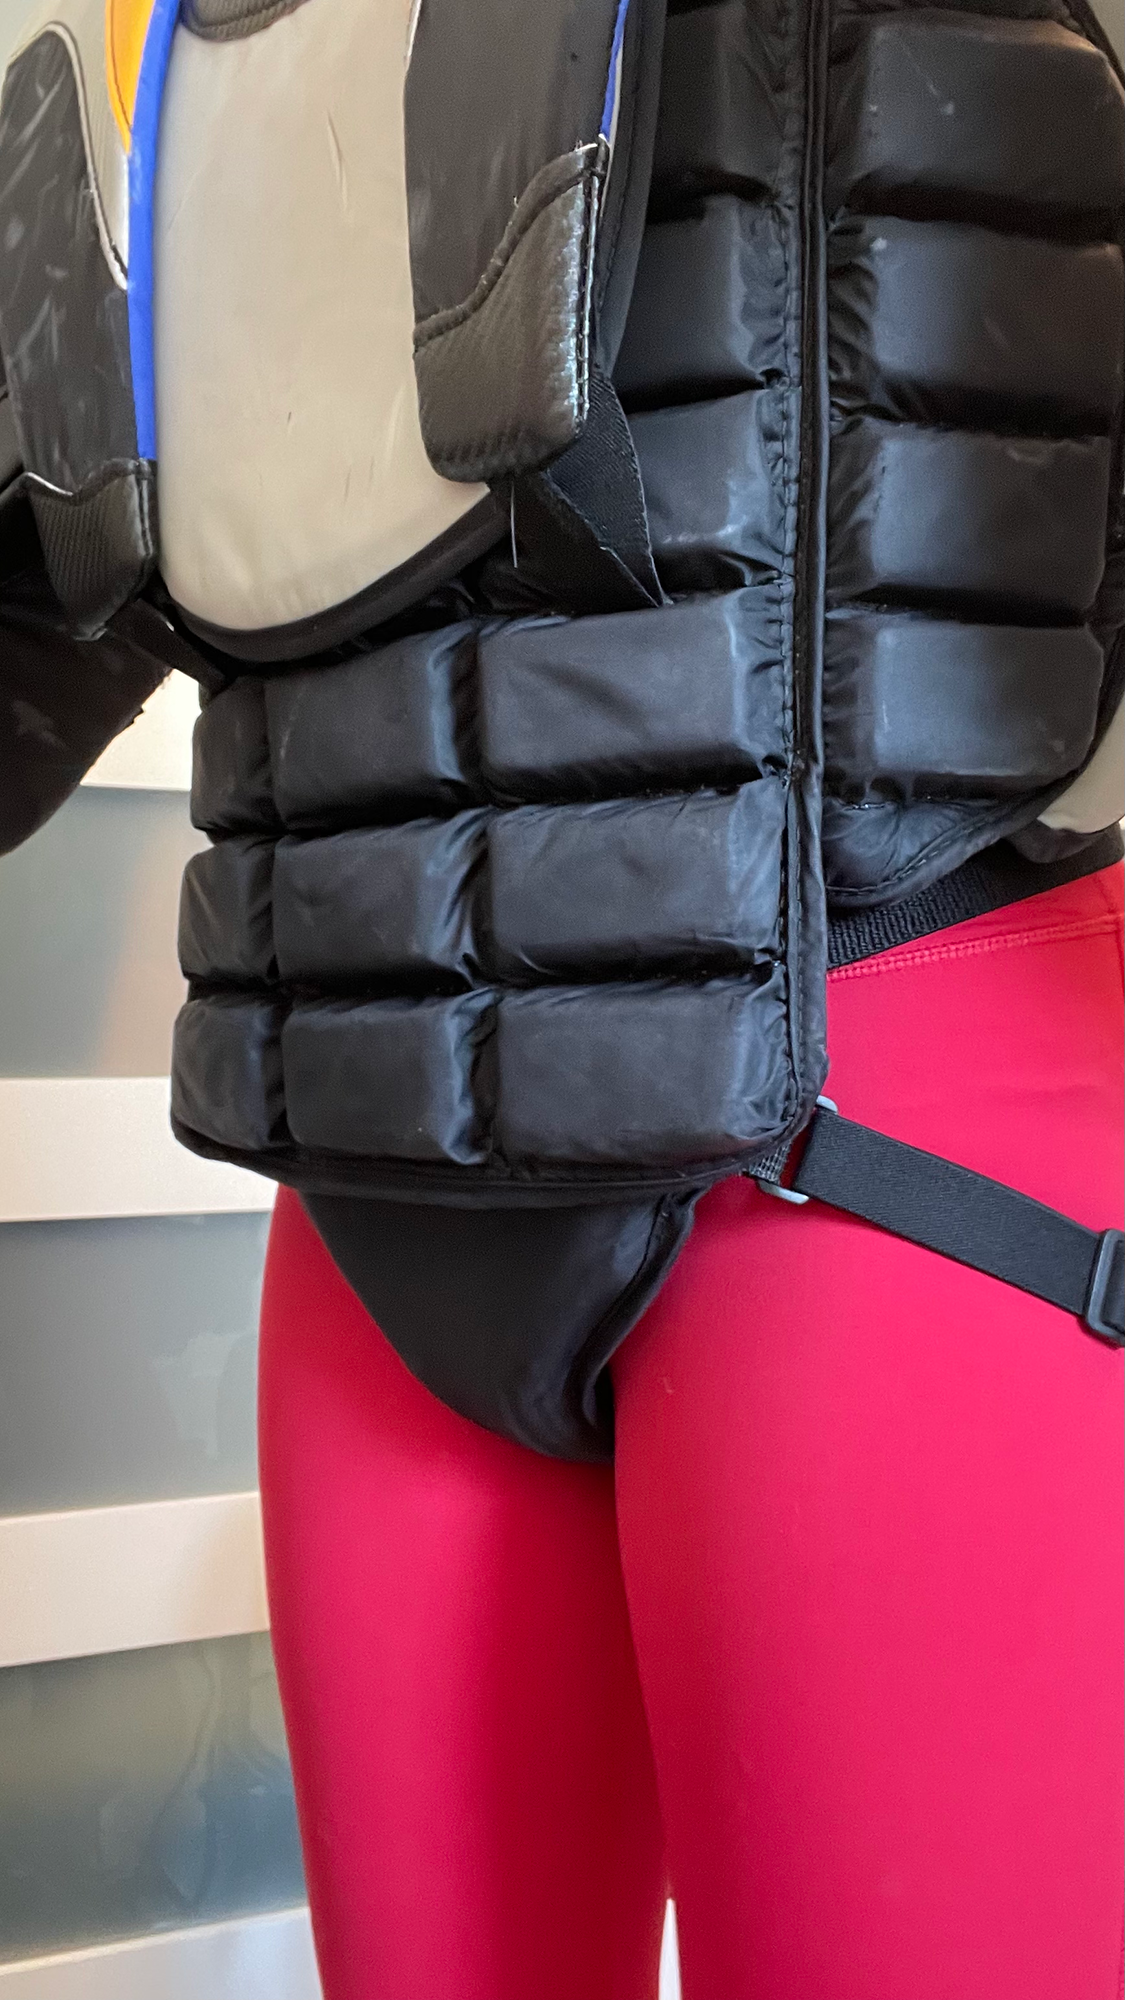 Chest overlapping crotch protection